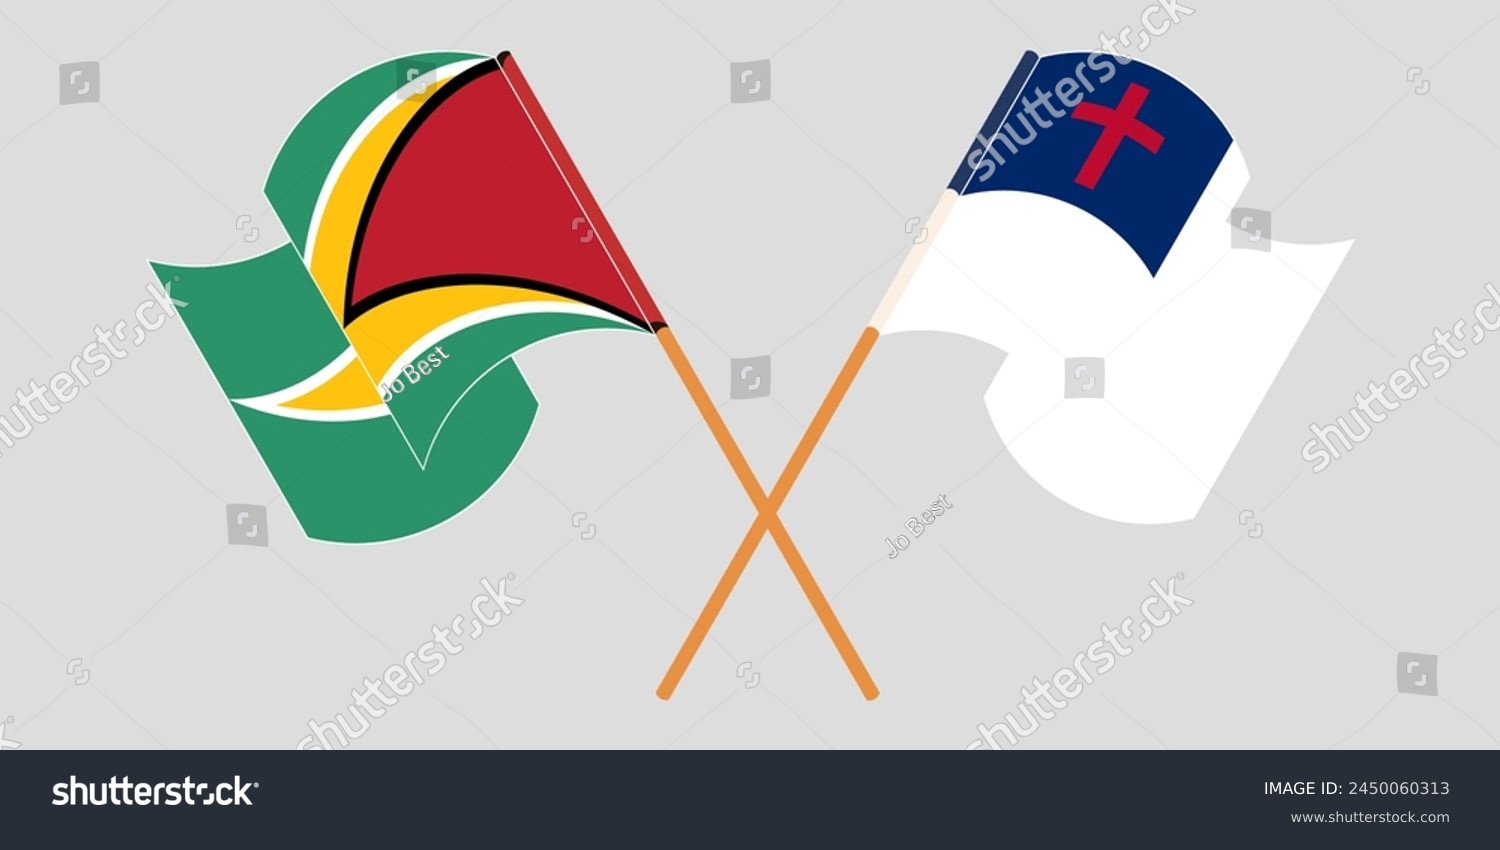 SVG of Crossed and waving flags of Guyana and christianity. Vector illustration
 svg